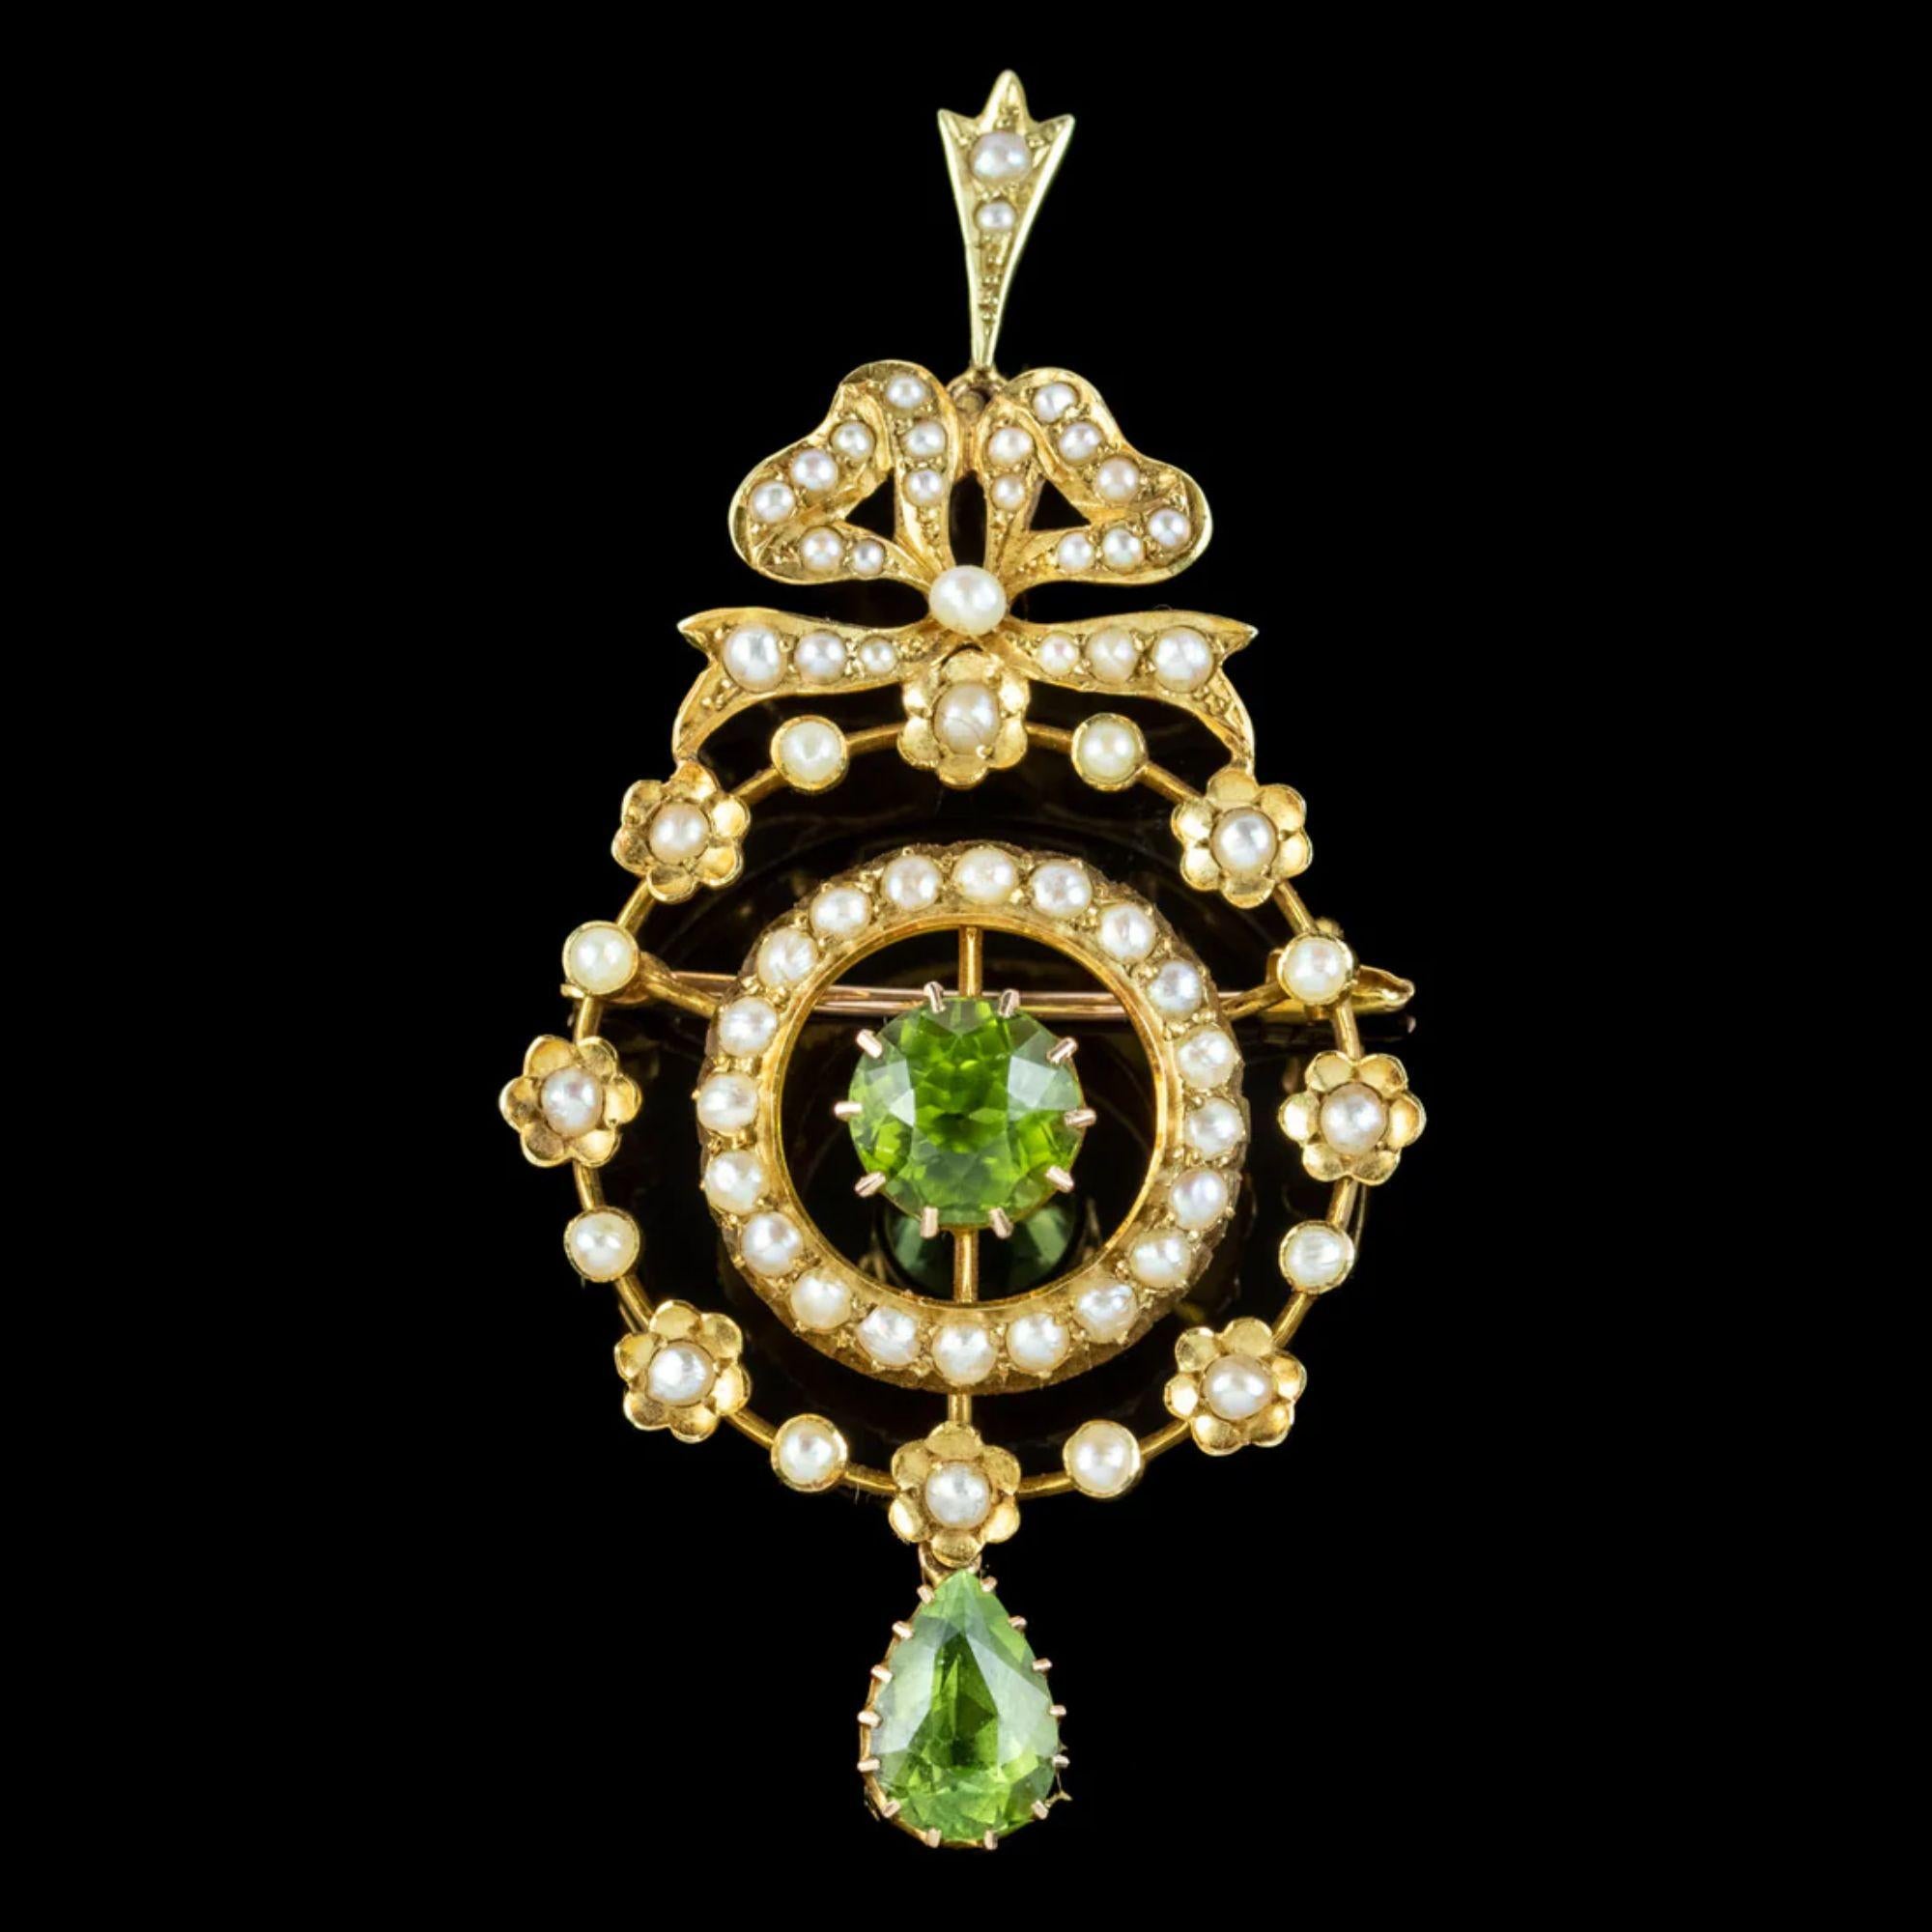 A pretty antique Edwardian pendant from the early 1900s depicting a floral wreath topped with a bow. It’s decorated with an array of gleaming white seed pearls across the front and two rich green peridots, one in the centre and one hanging from a